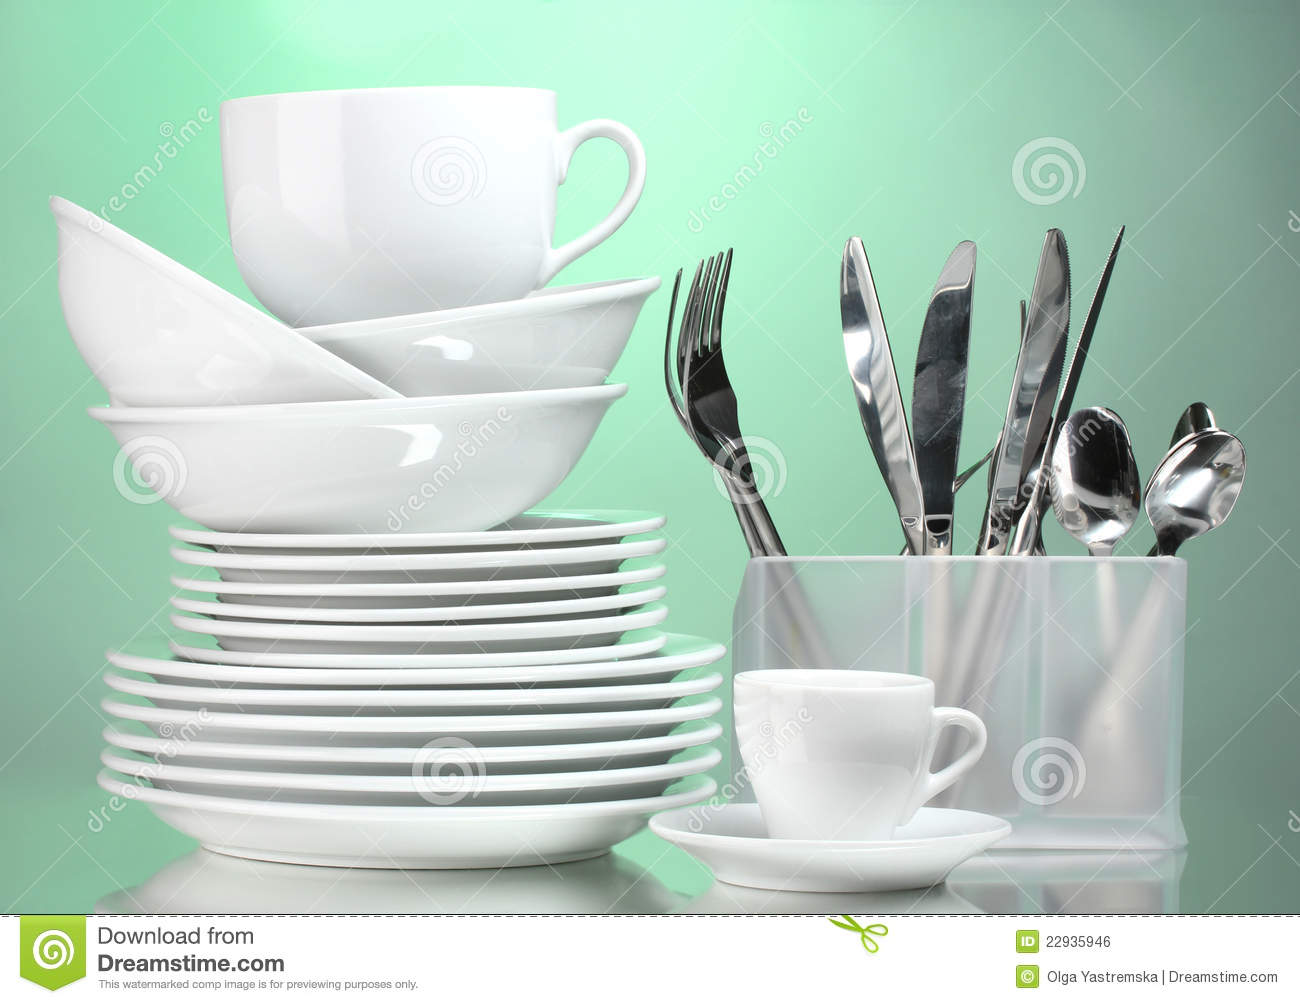 Clean Plates Cups And Cutlery Royalty Free Stock Image   Image    